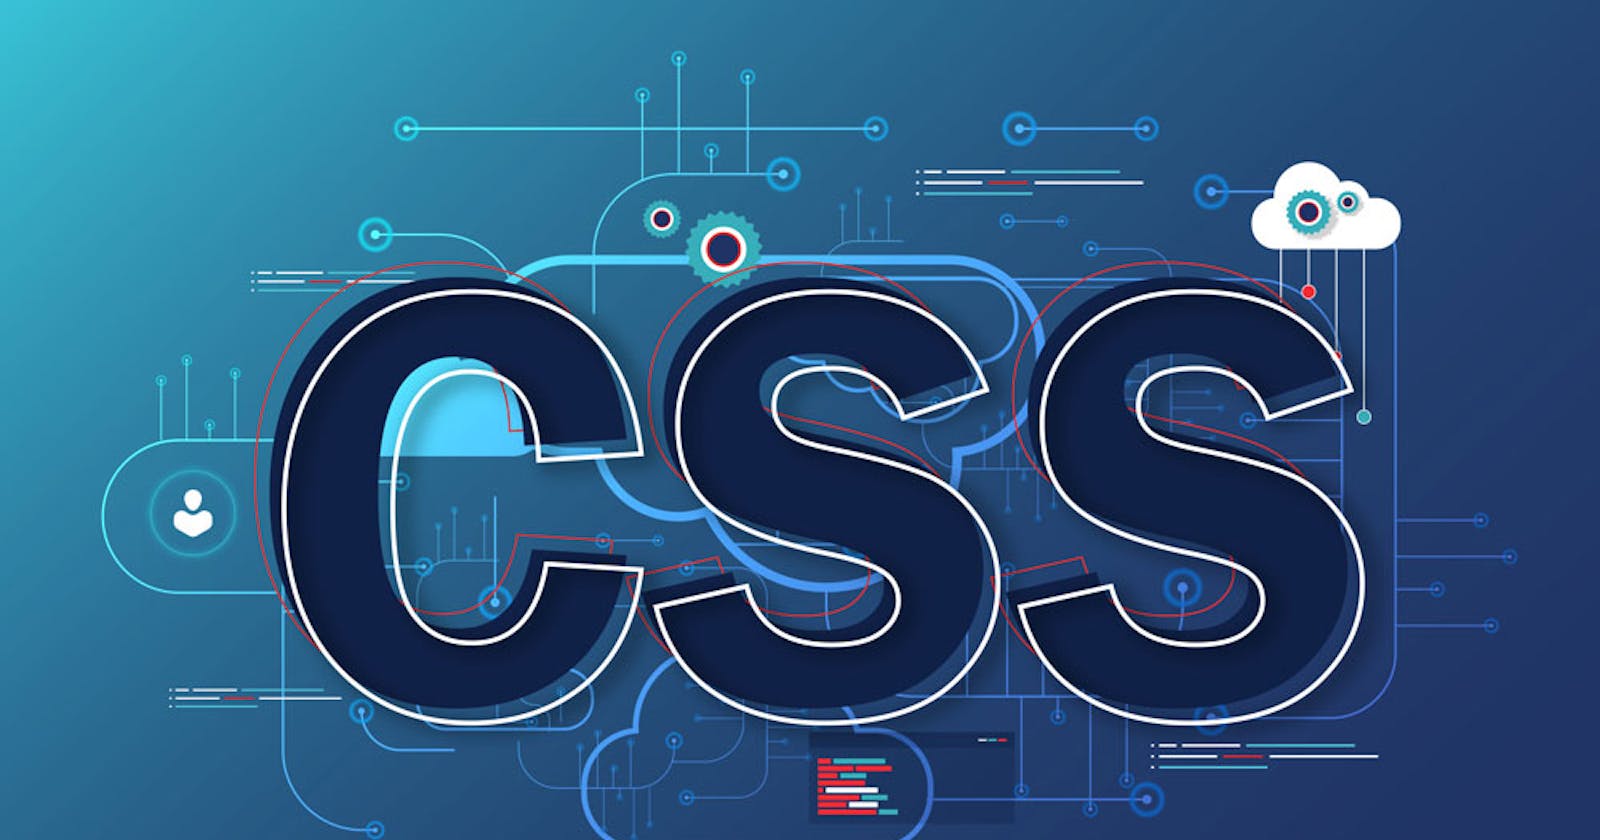 Introduction to CSS for web development